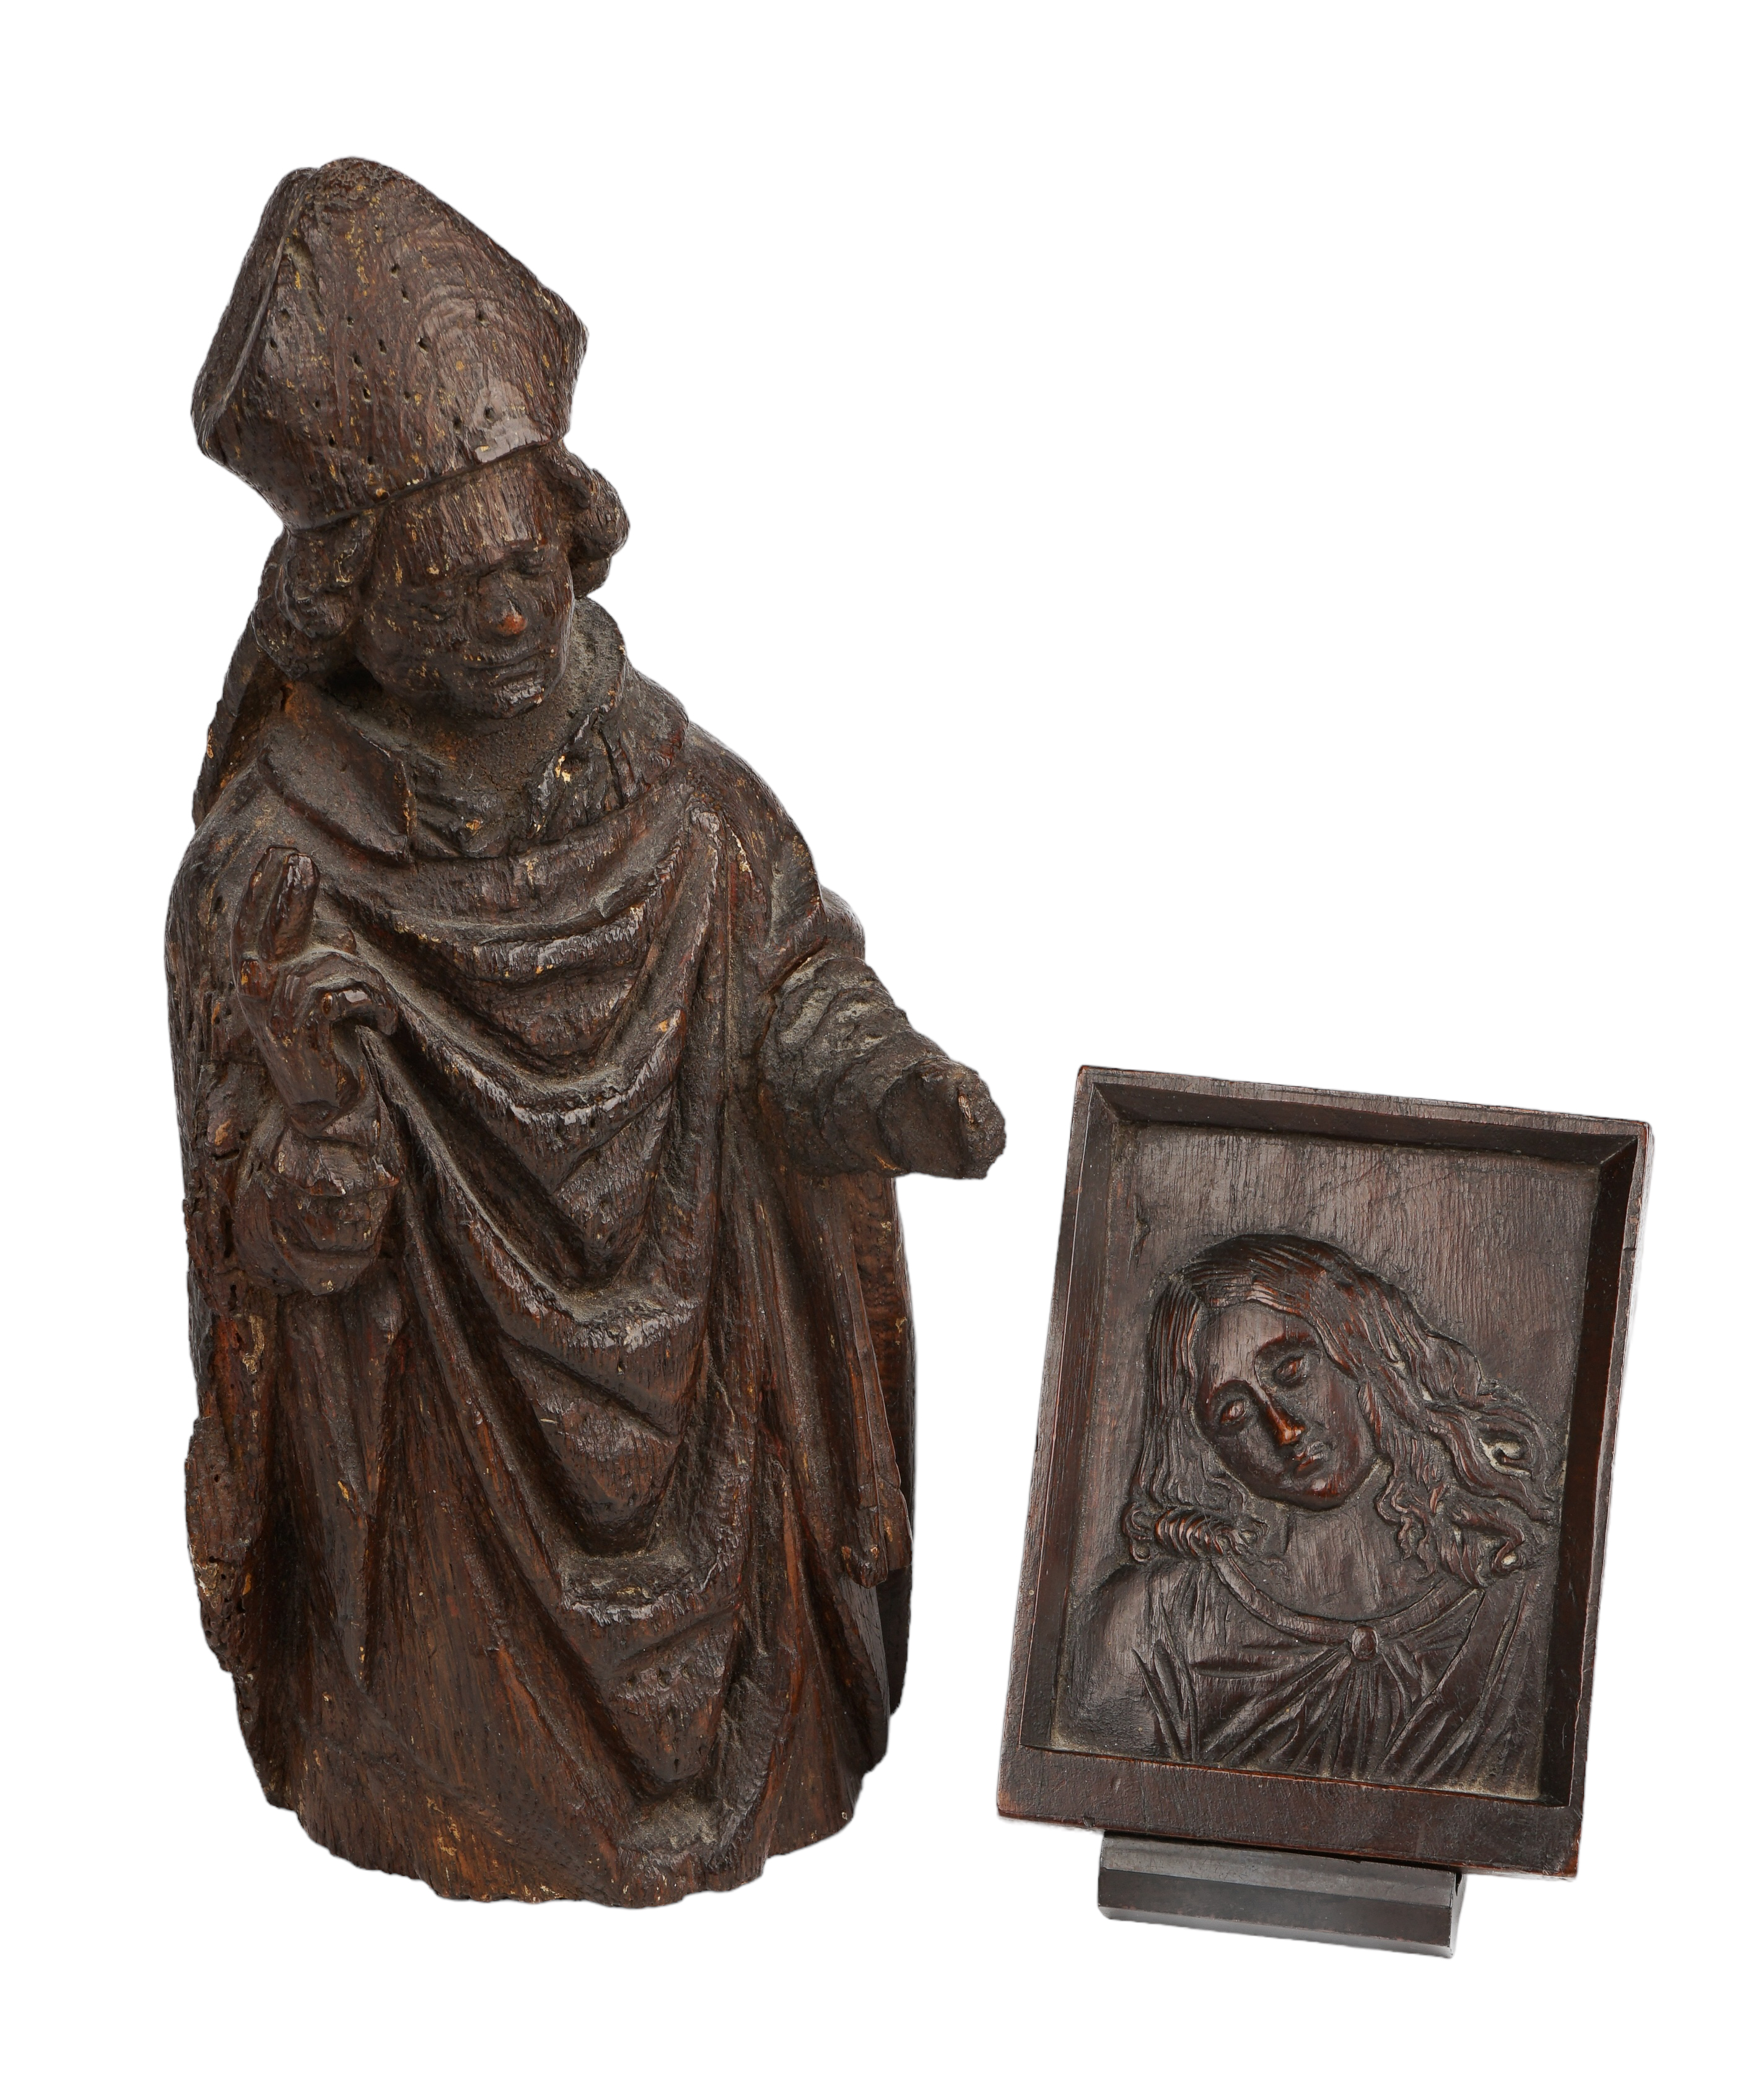  2 Carved wood religious items  30914a